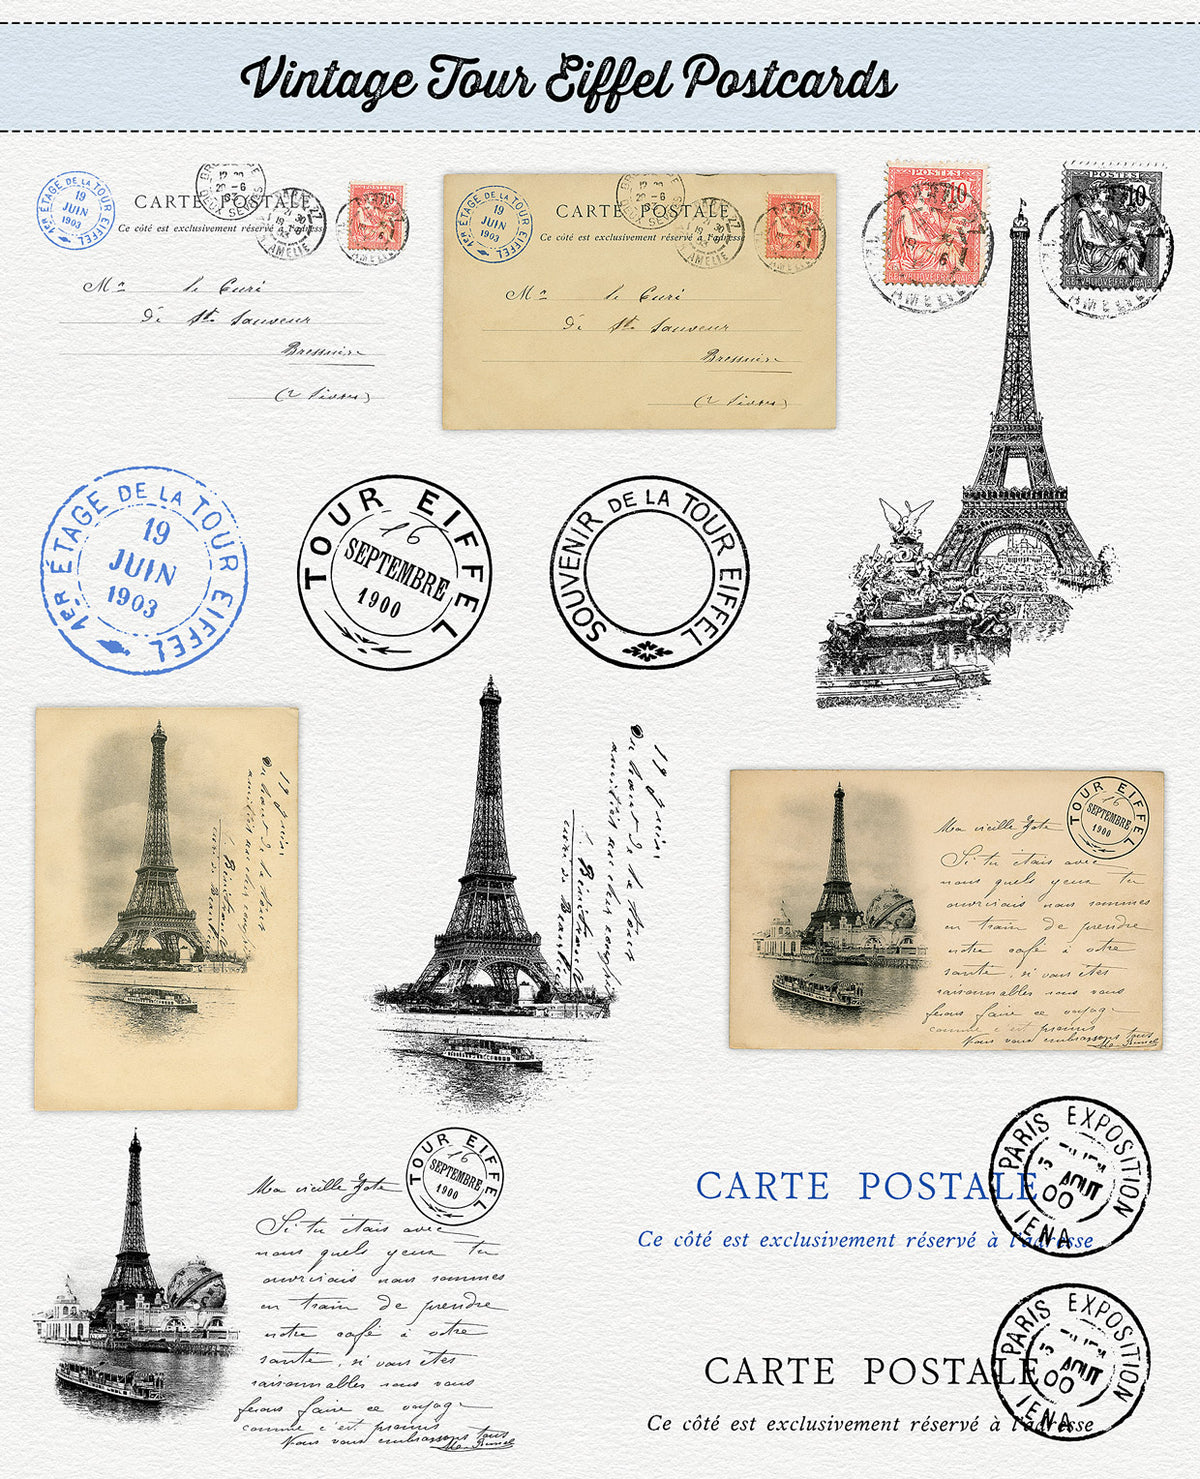 Eiffel Tower vintage postcards with stamps, illustrations, and postmarks digital graphics from The Essential Vintage French Graphics Collection.